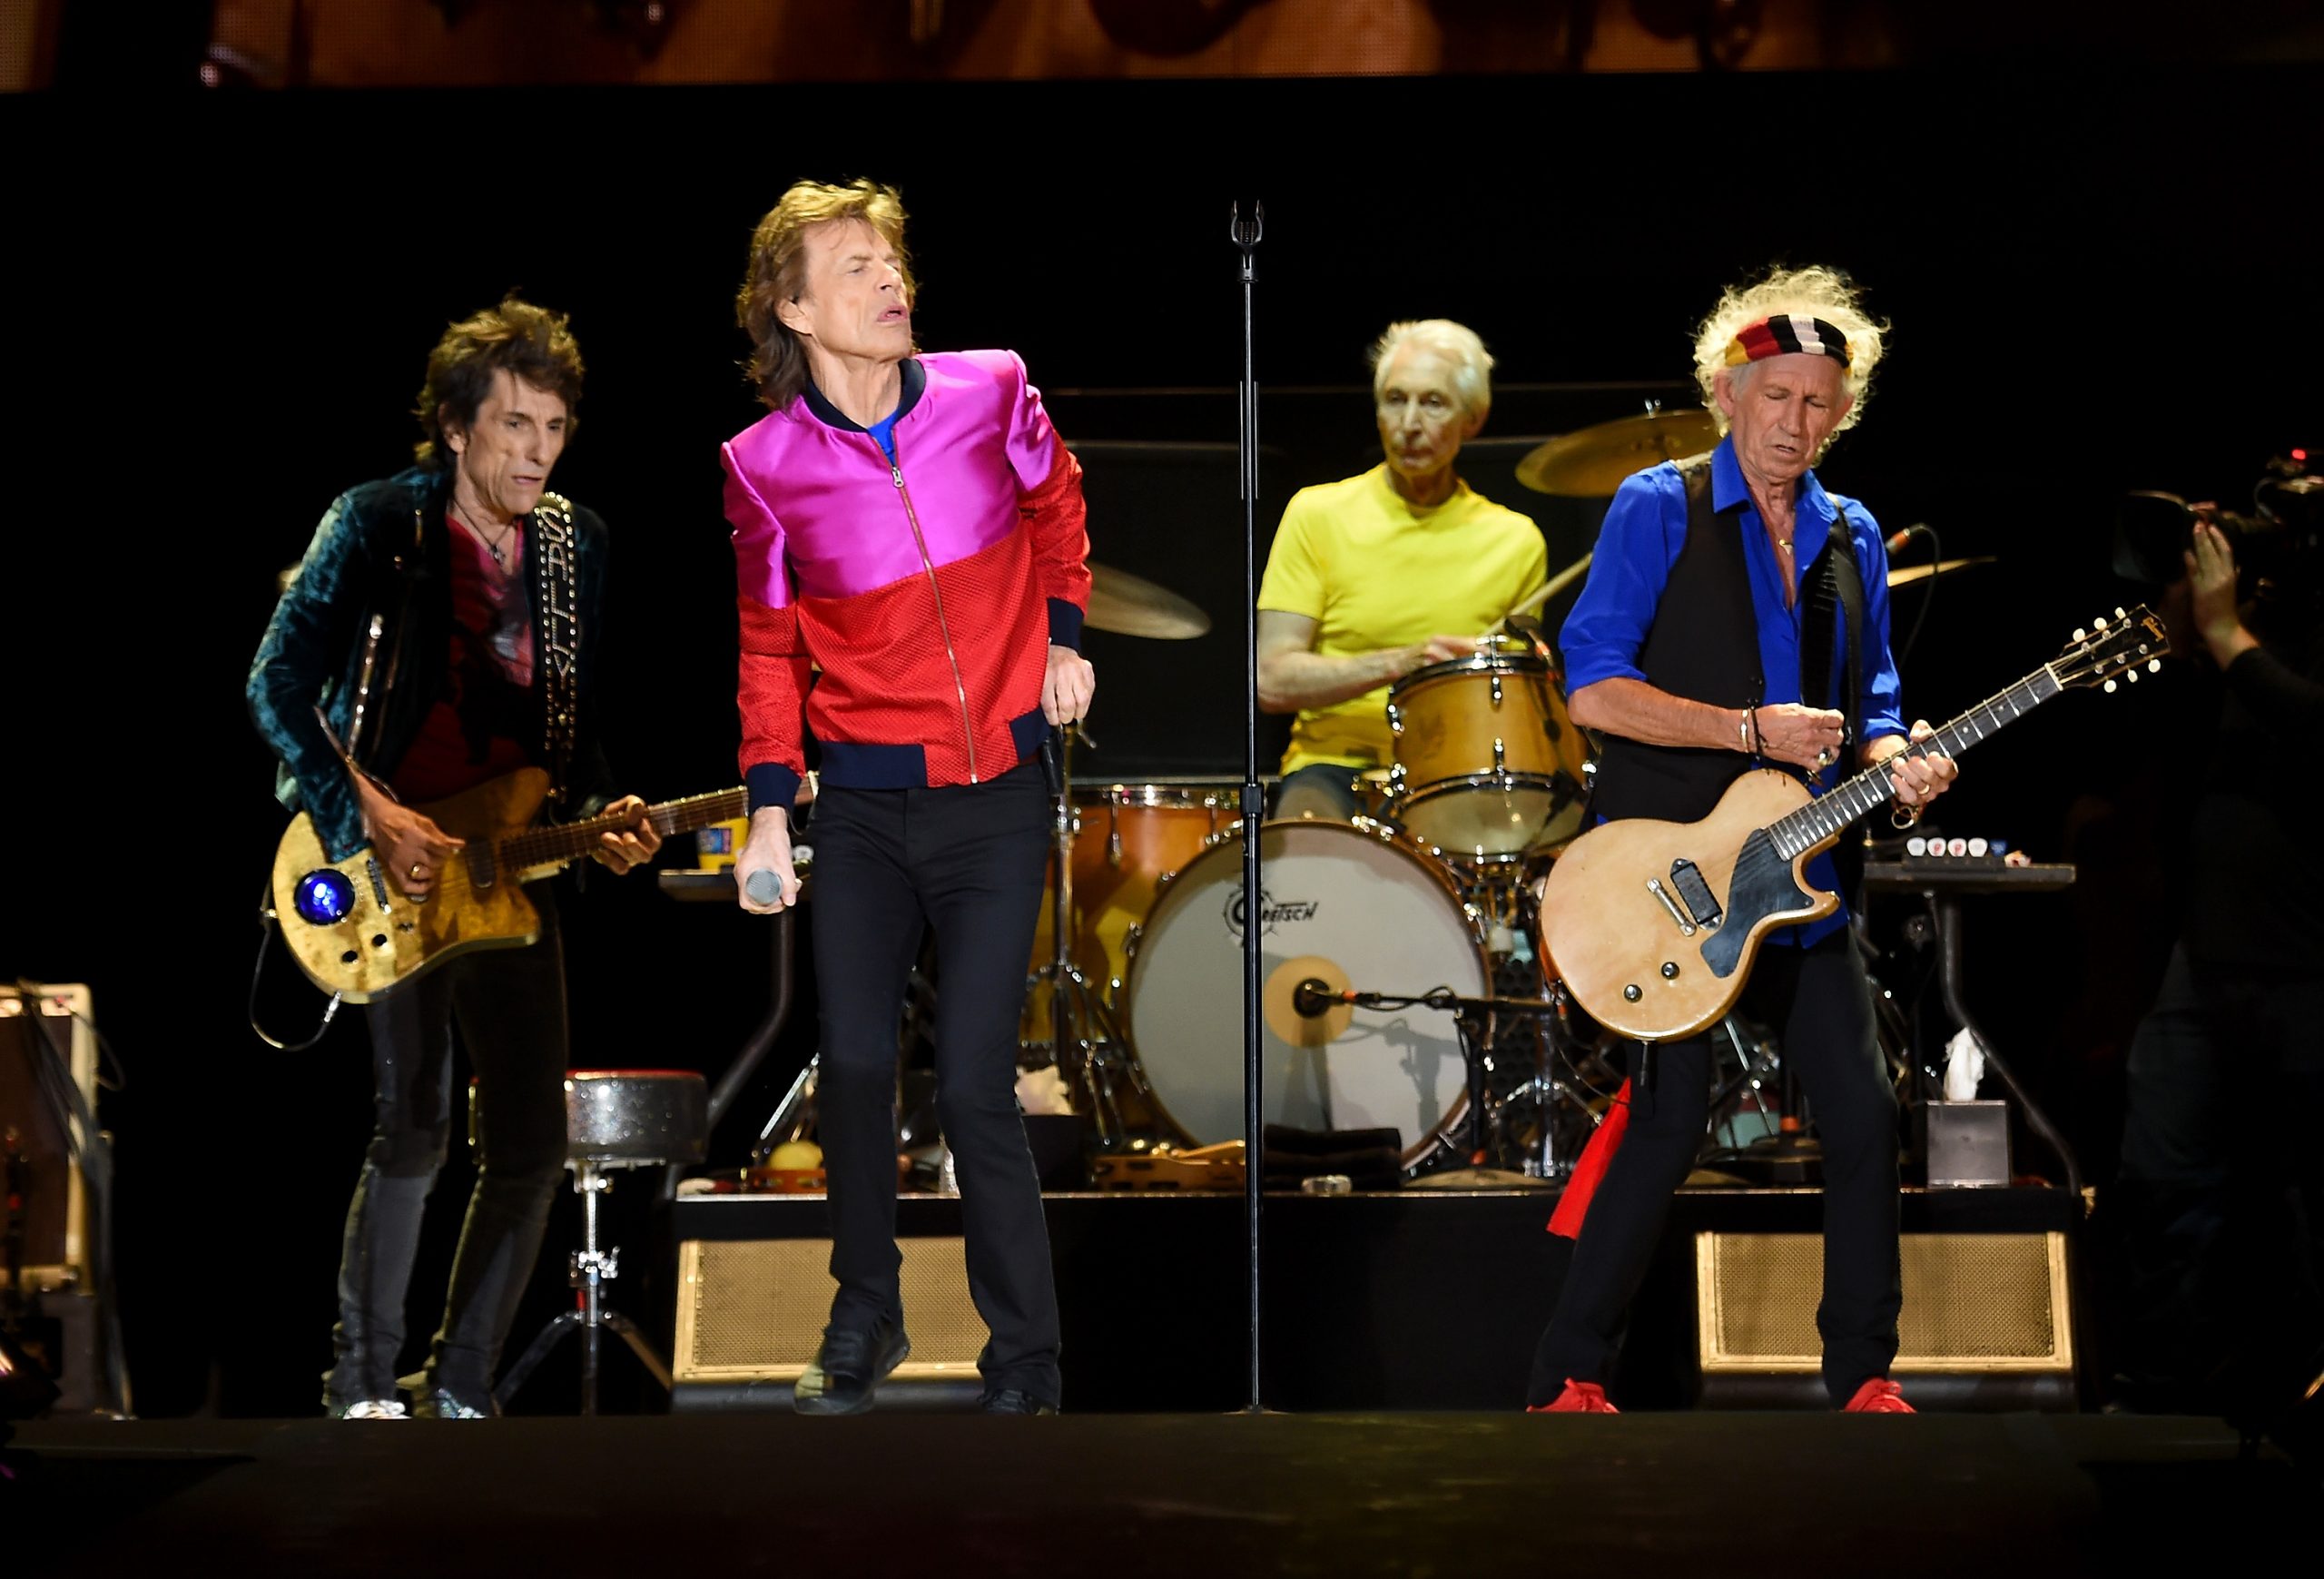 the-rolling-stones-1